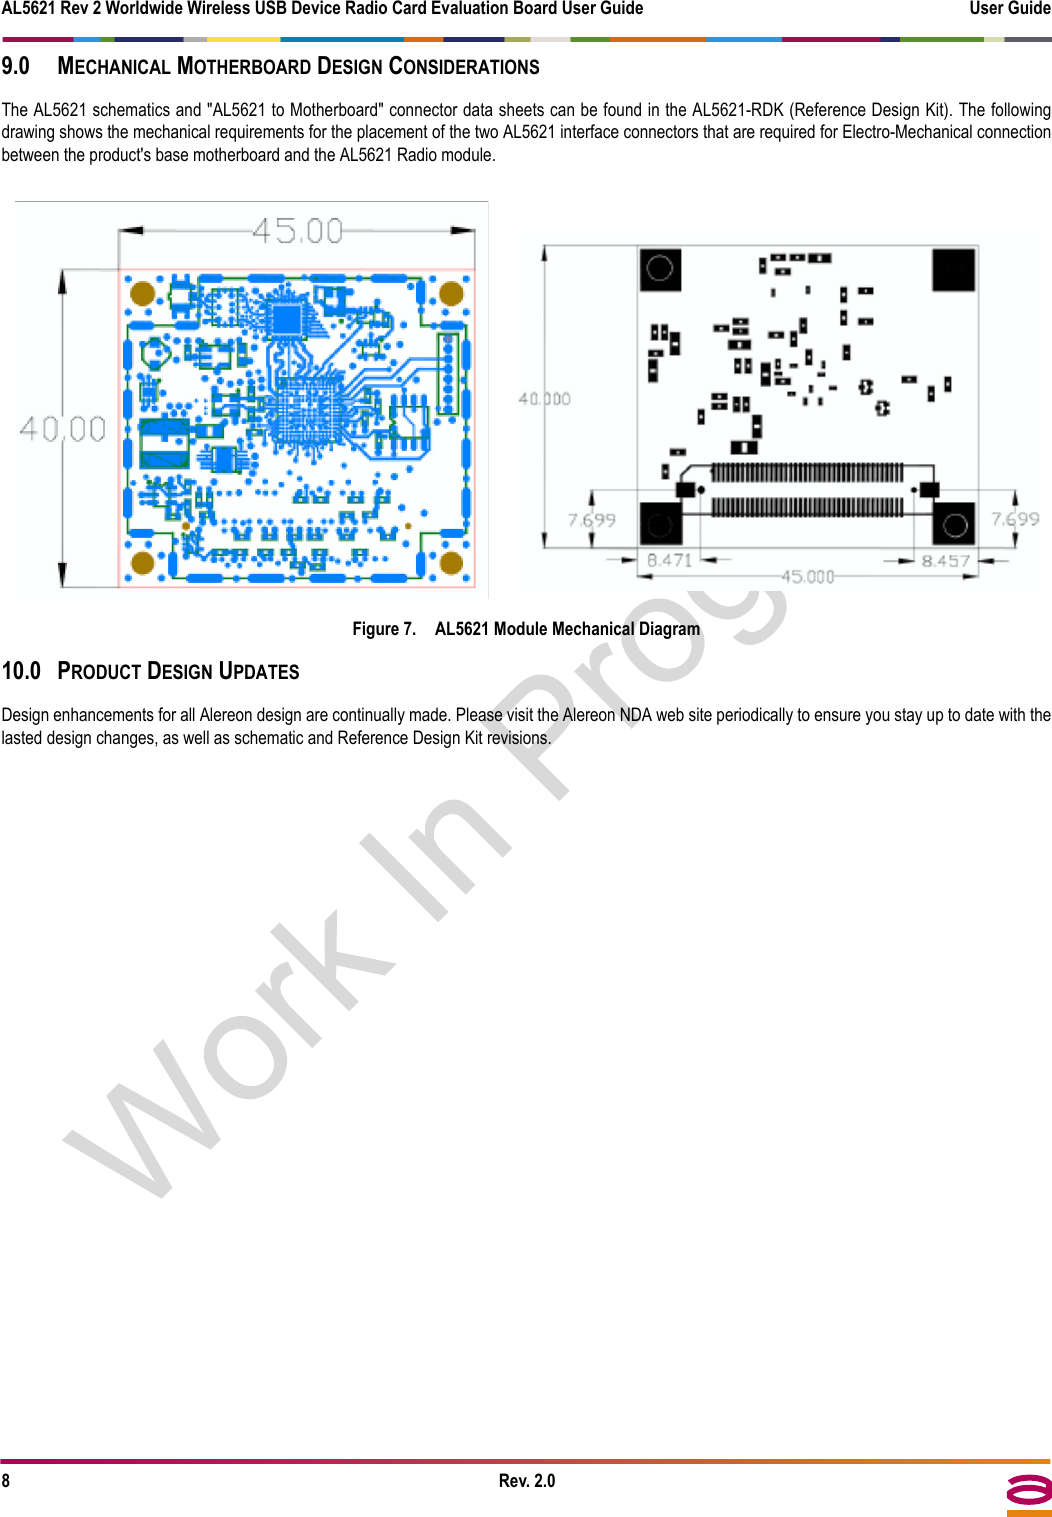 AL5621 Rev 2 Worldwide Wireless USB Device Radio Card Evaluation Board User Guide User Guide8Rev. 2.09.0 MECHANICAL MOTHERBOARD DESIGN CONSIDERATIONSThe AL5621 schematics and &quot;AL5621 to Motherboard&quot; connector data sheets can be found in the AL5621-RDK (Reference Design Kit). The followingdrawing shows the mechanical requirements for the placement of the two AL5621 interface connectors that are required for Electro-Mechanical connectionbetween the product&apos;s base motherboard and the AL5621 Radio module.Figure 7. AL5621 Module Mechanical Diagram10.0 PRODUCT DESIGN UPDATESDesign enhancements for all Alereon design are continually made. Please visit the Alereon NDA web site periodically to ensure you stay up to date with thelasted design changes, as well as schematic and Reference Design Kit revisions.